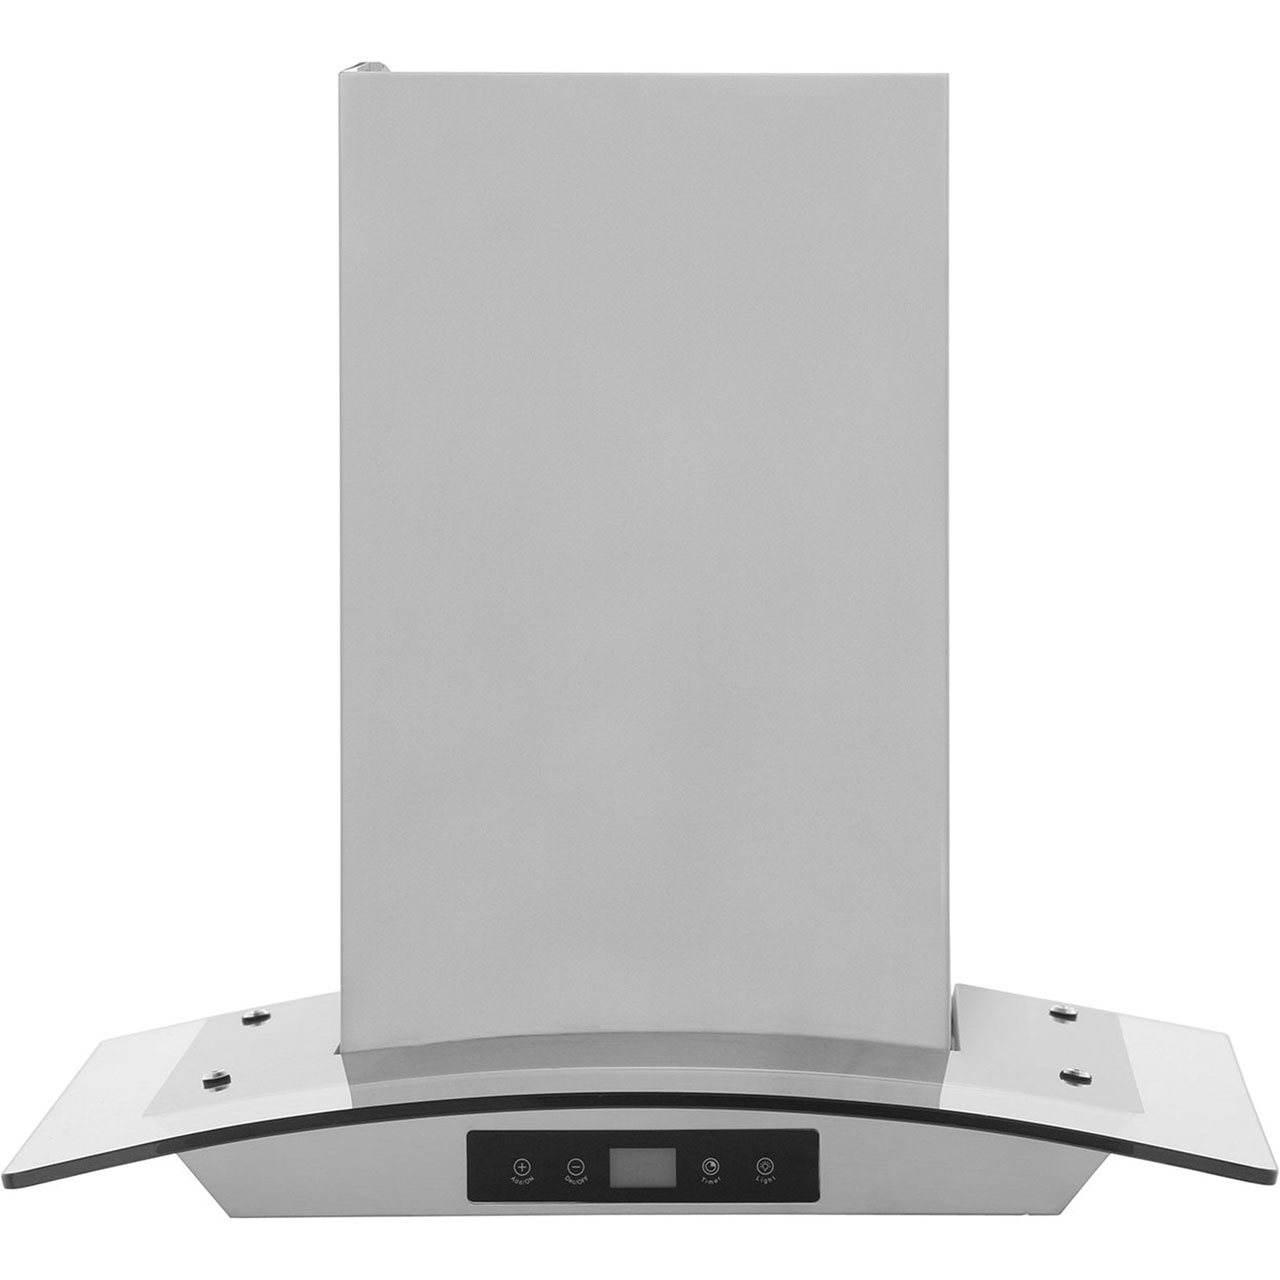 Baumatic BTC6750GL Integrated Cooker Hood in Stainless Steel / Glass